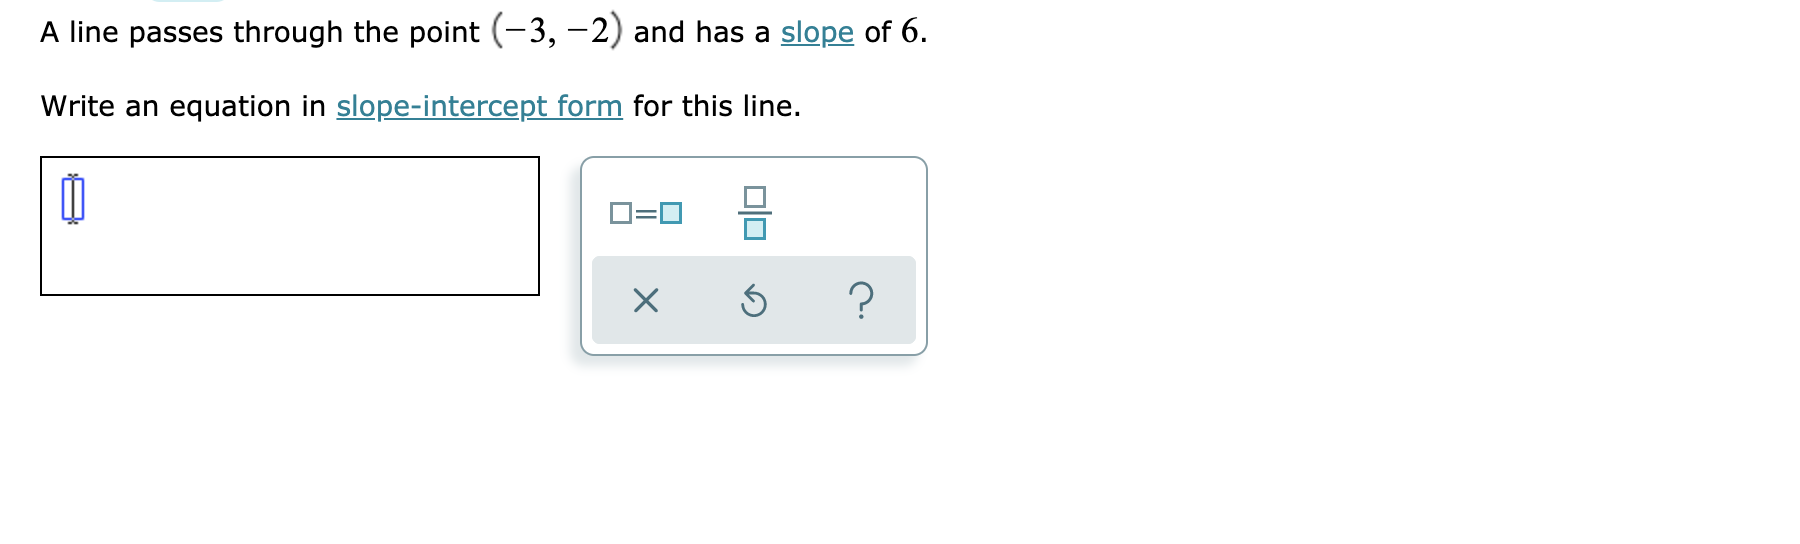 A line passes through the point (-3, -2) and has a slope of 6
Write an equation in slope-intercept form for this line.
?
